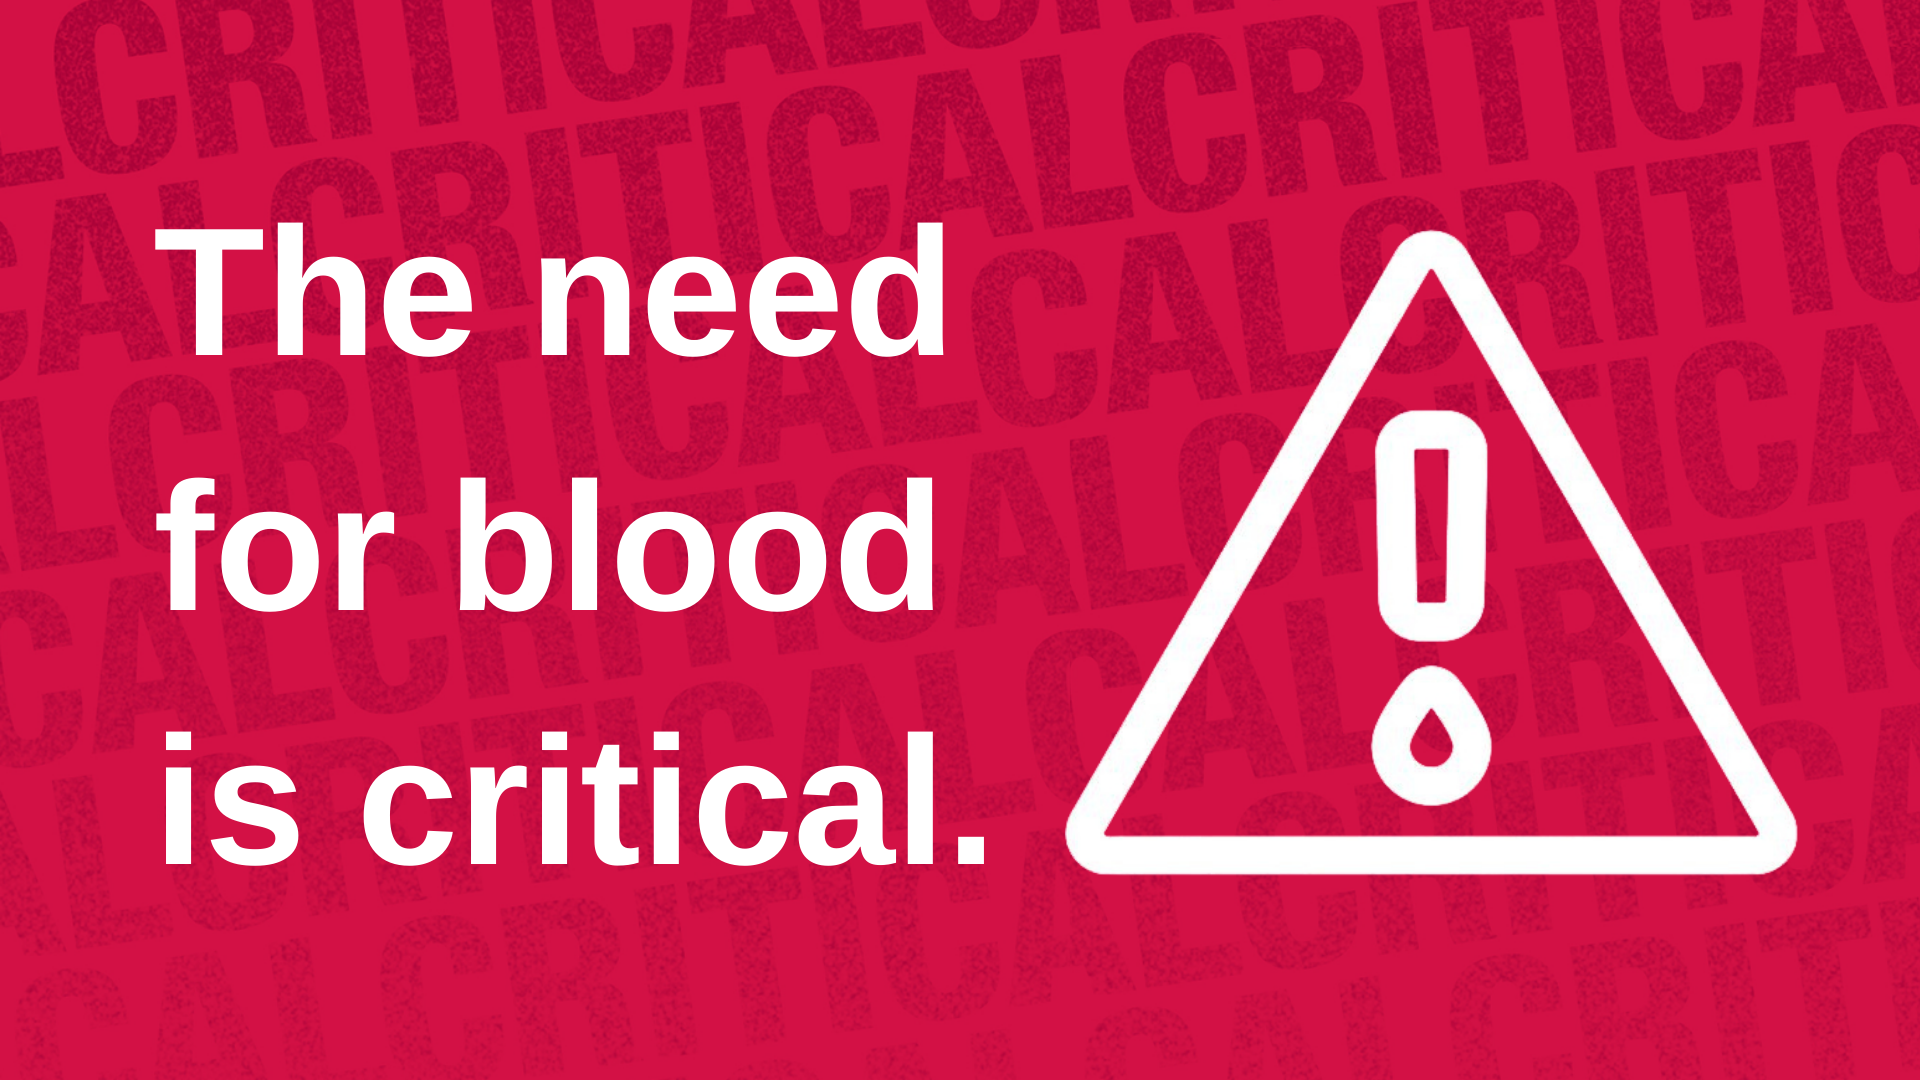 Carter BloodCare issues critical alert for blood supply across 57 Texas counties